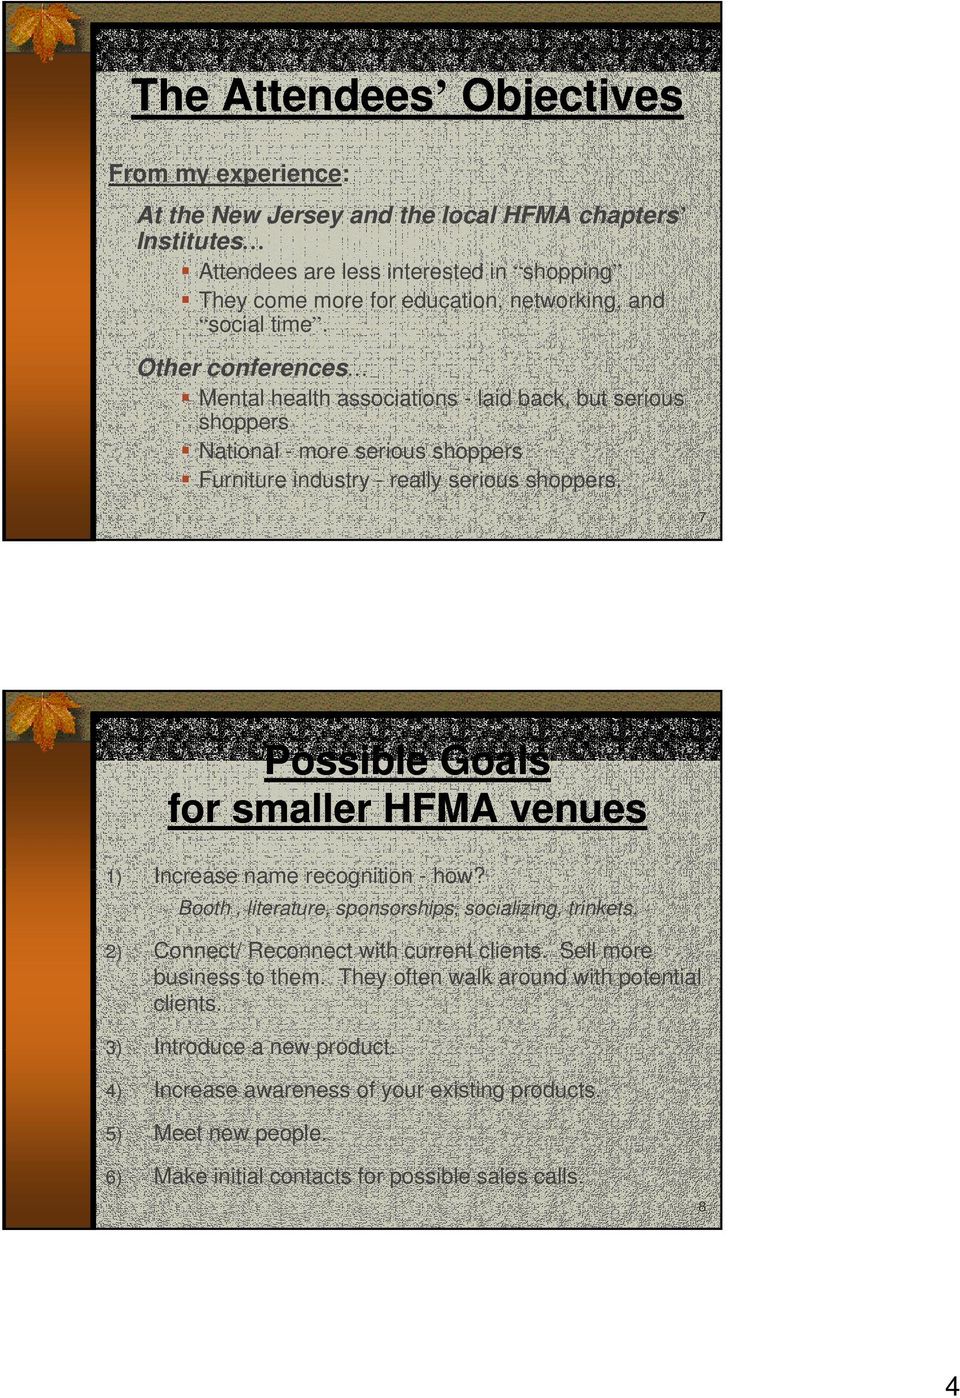 7 Possible Goals for smaller HFMA venues 1) Increase name recognition - how? Booth, literature, sponsorships, socializing, trinkets. 2) Connect/ Reconnect with current clients.